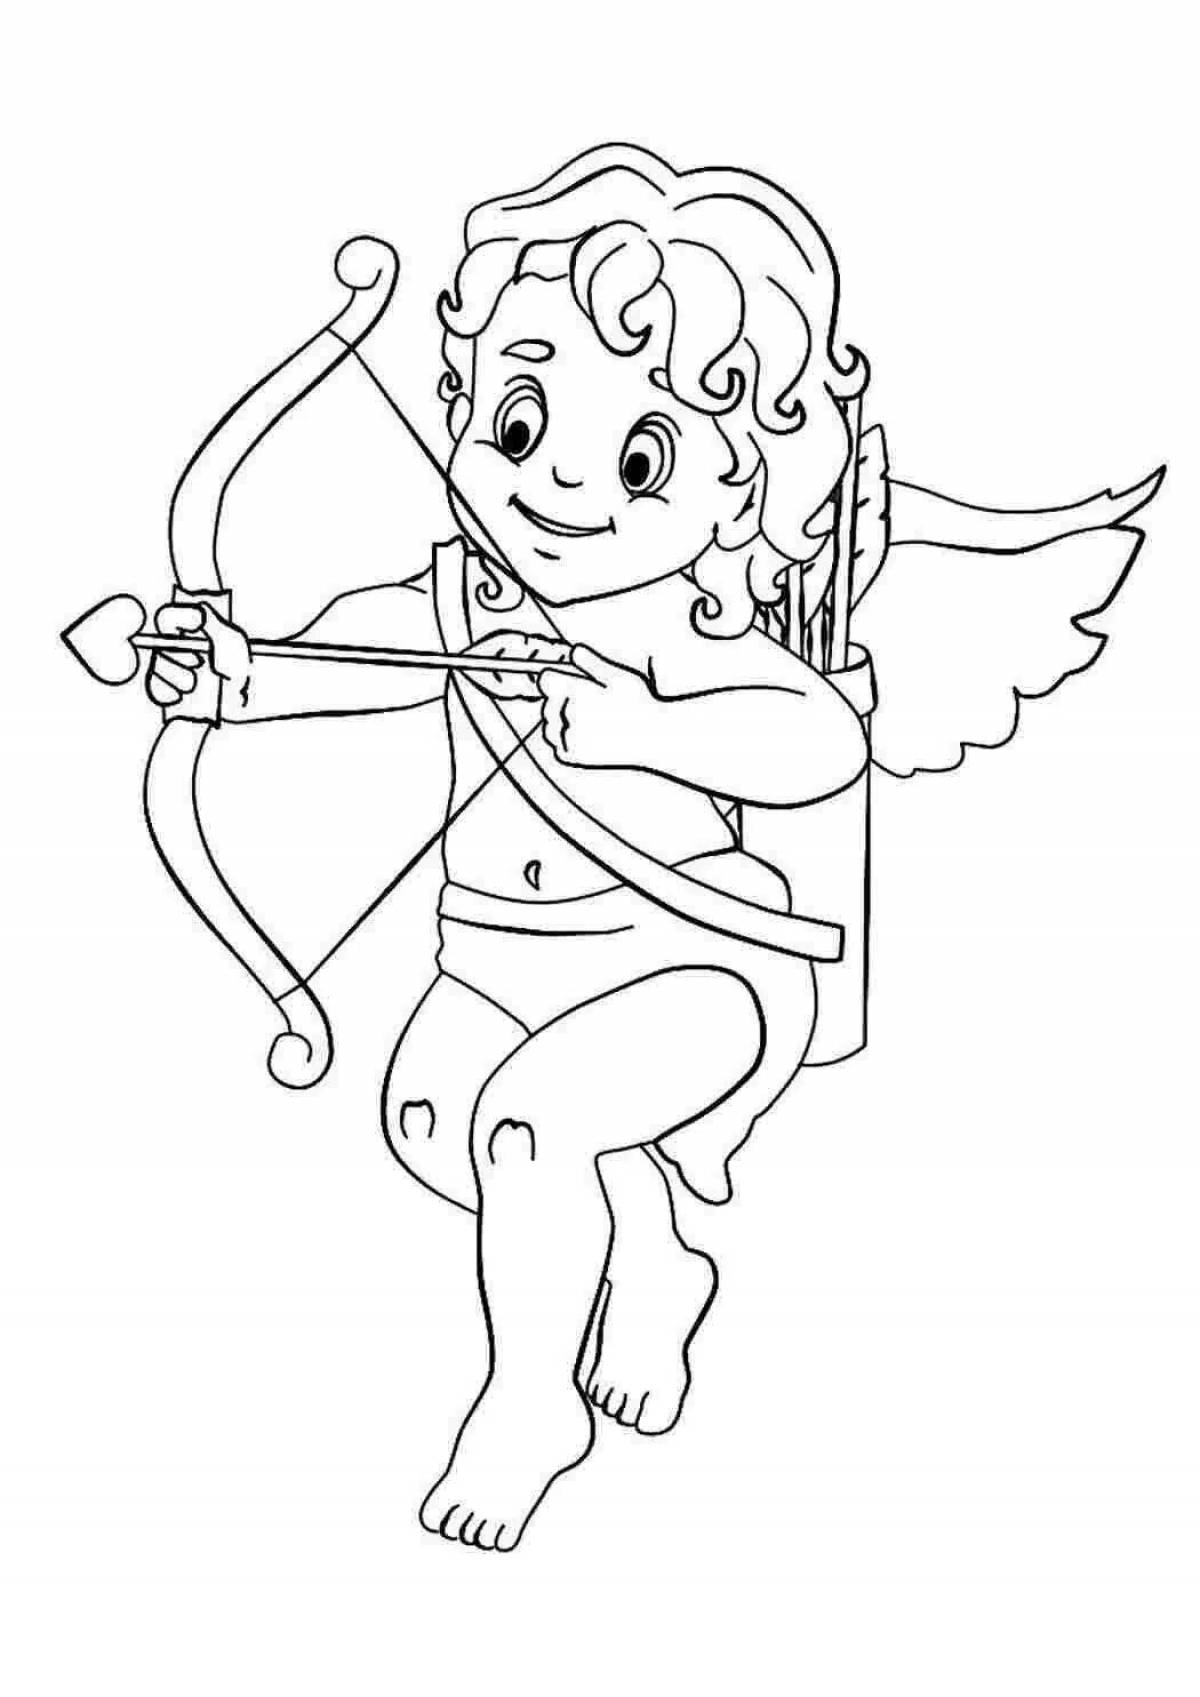 Coloring book with sparkling cupid